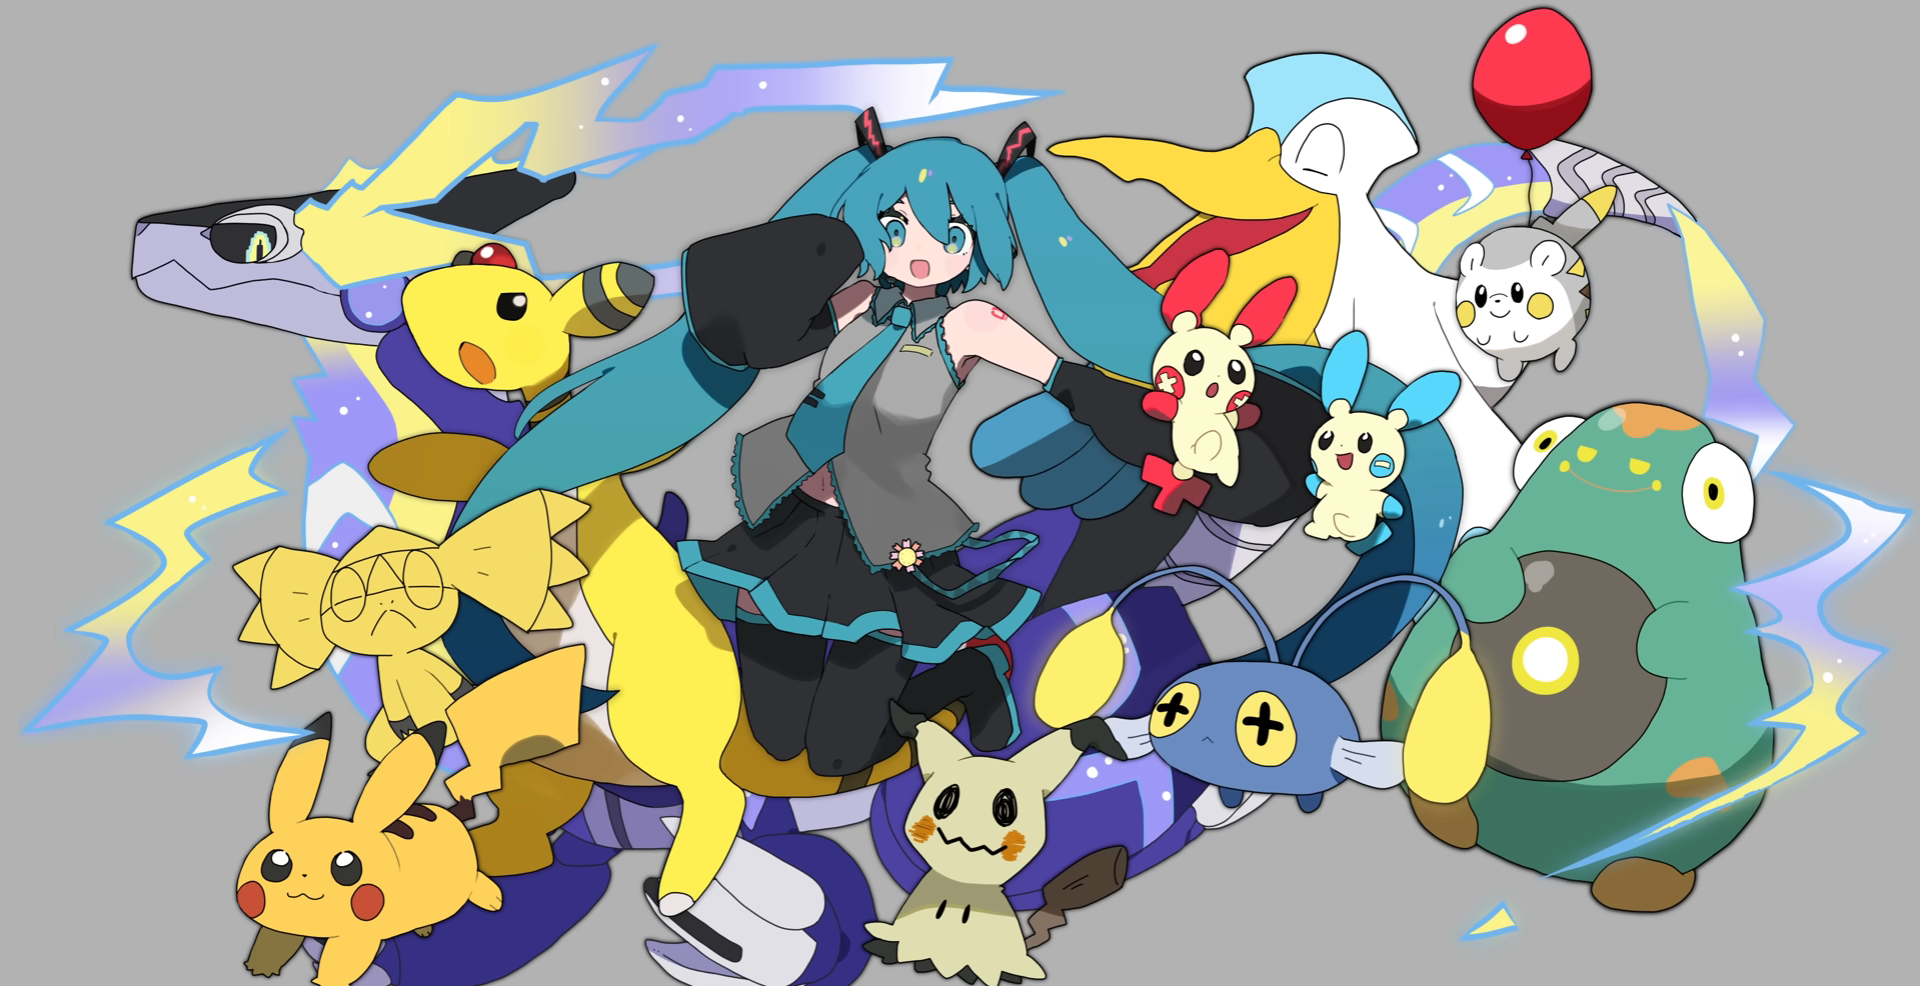 Hatsune Miku Pokémon Project Voltage Collab Launches Second Song, “Electrical Forecast”